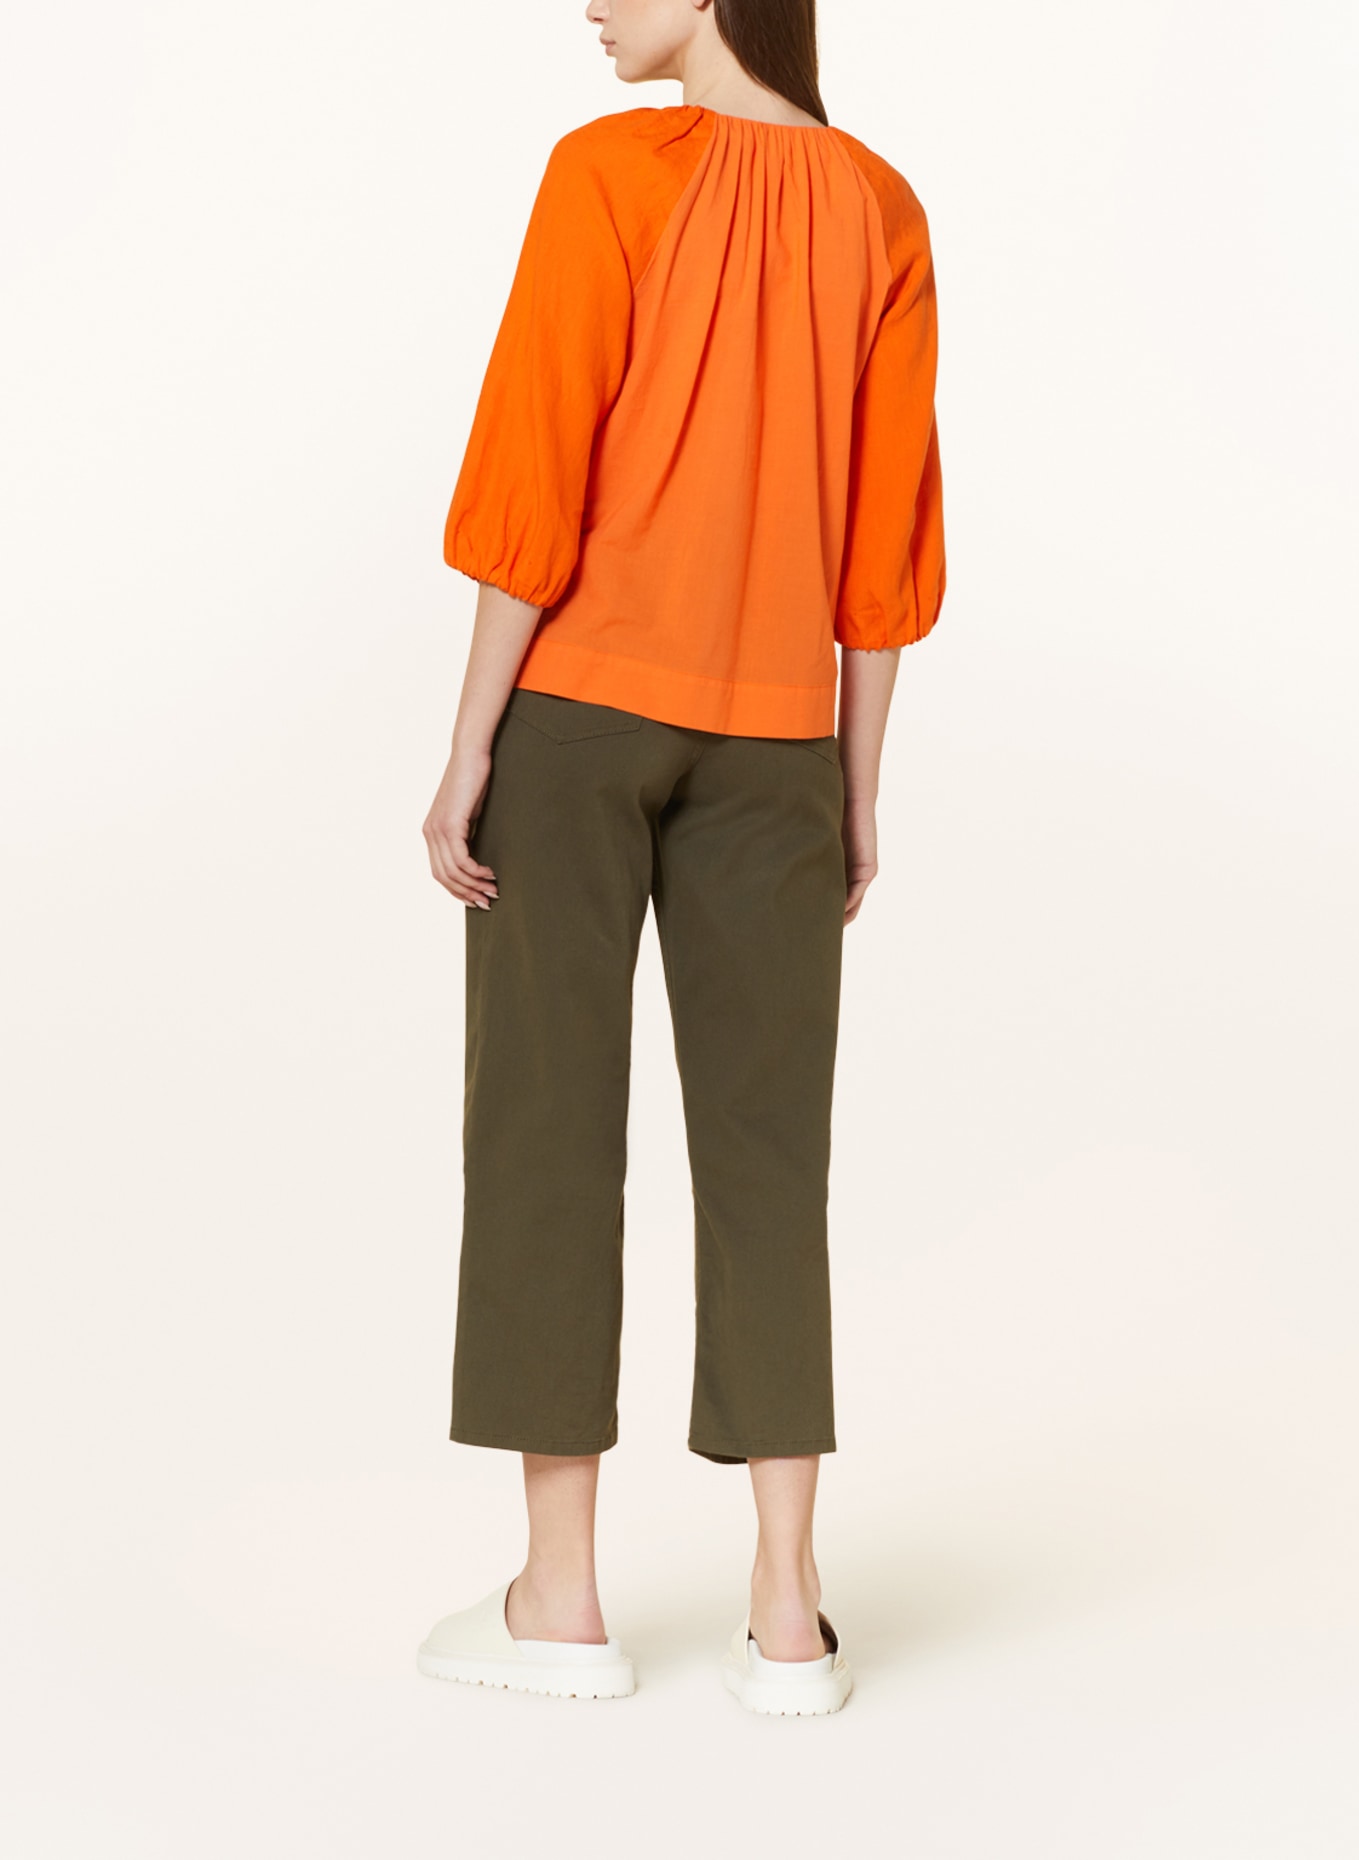 Marc O'Polo Shirt blouse in mixed materials with 3/4 sleeves, Color: ORANGE (Image 3)